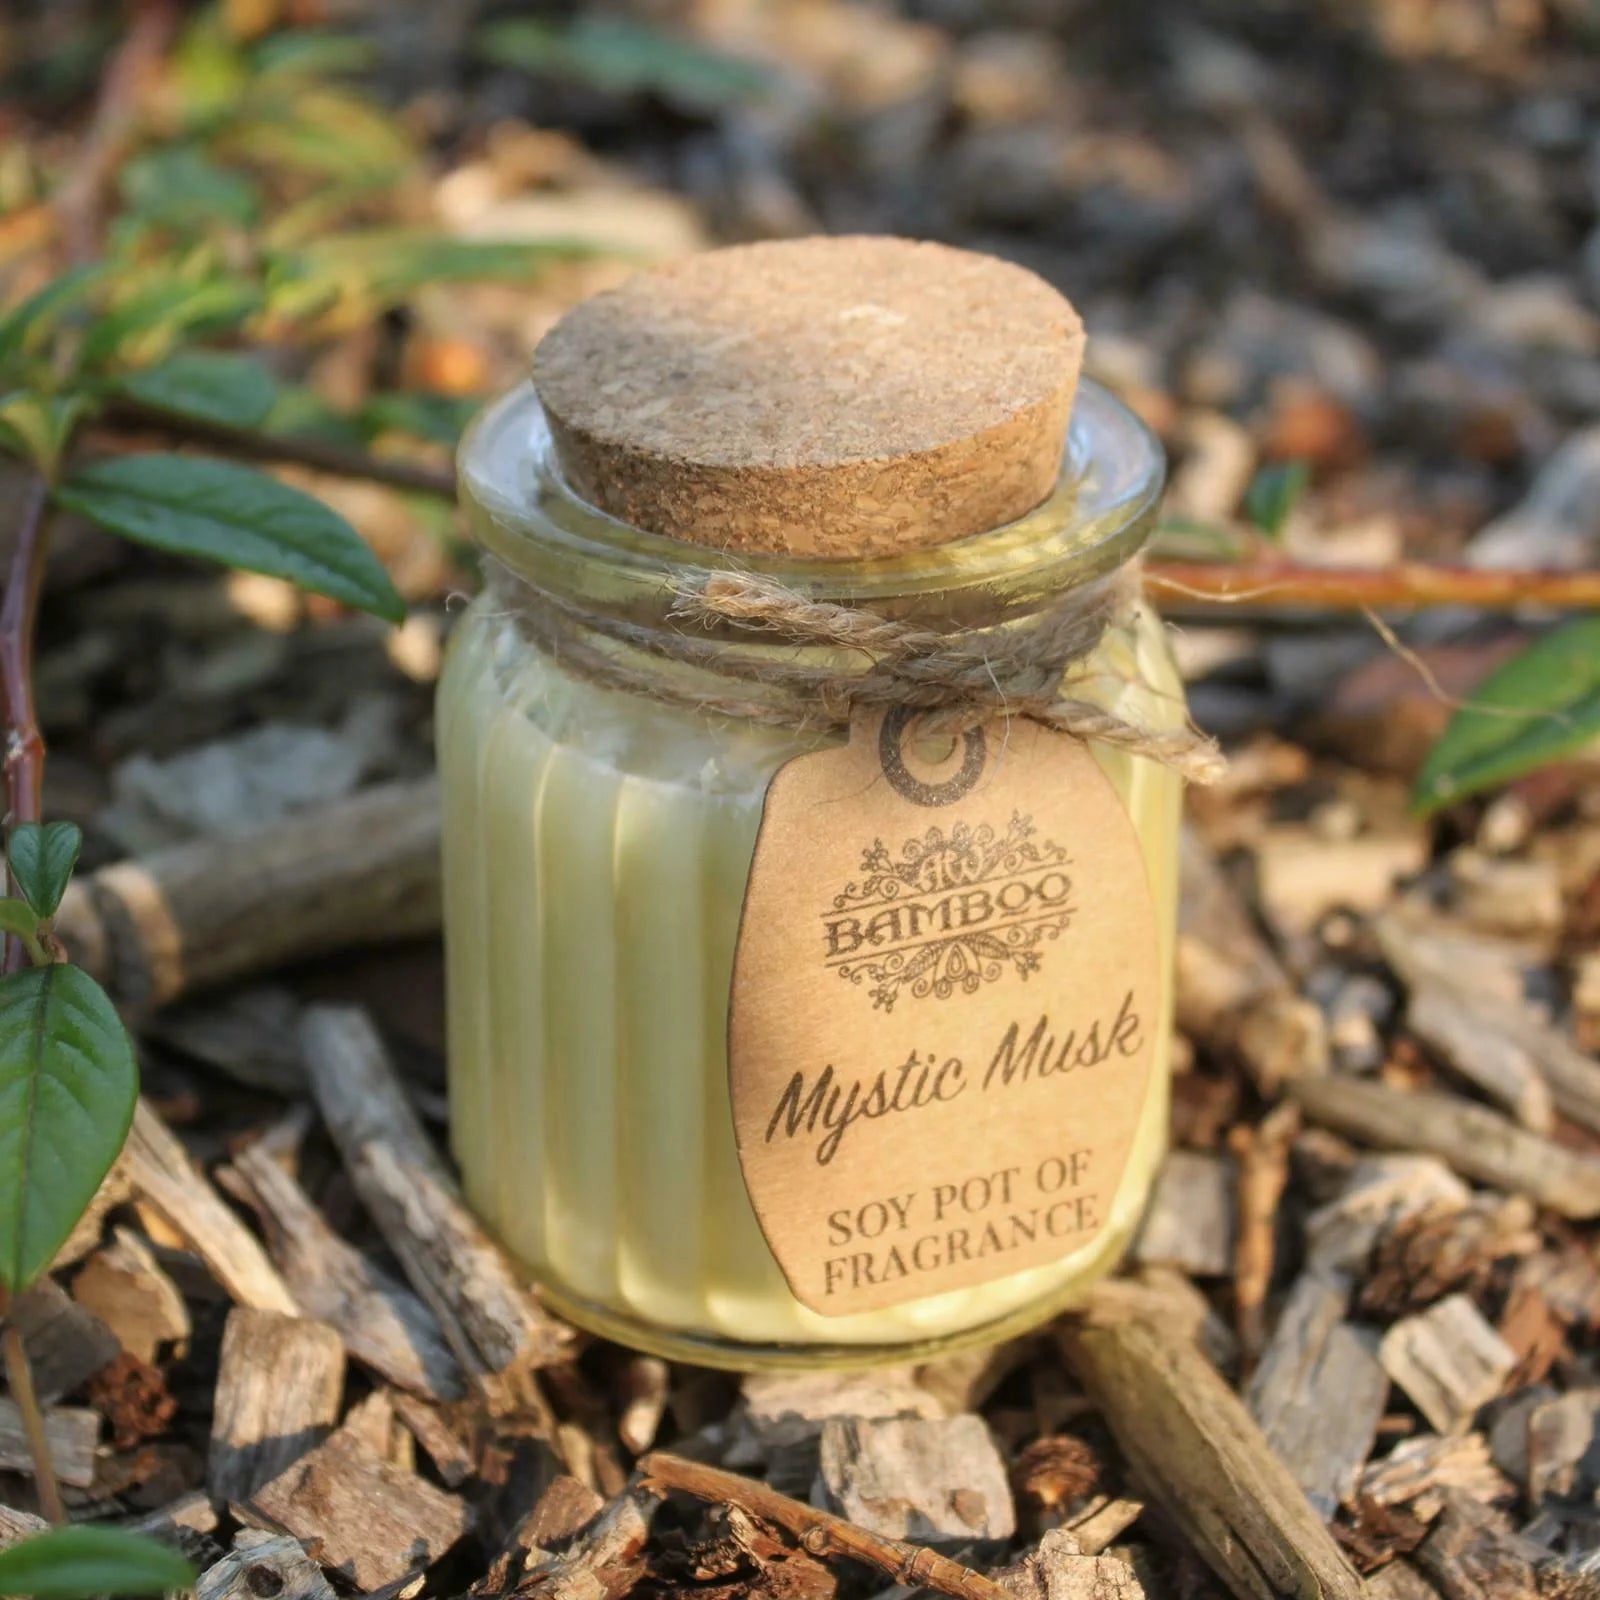 Mystic Musk Soy Pot Of Fragrance Candles - Ancient Wisdom